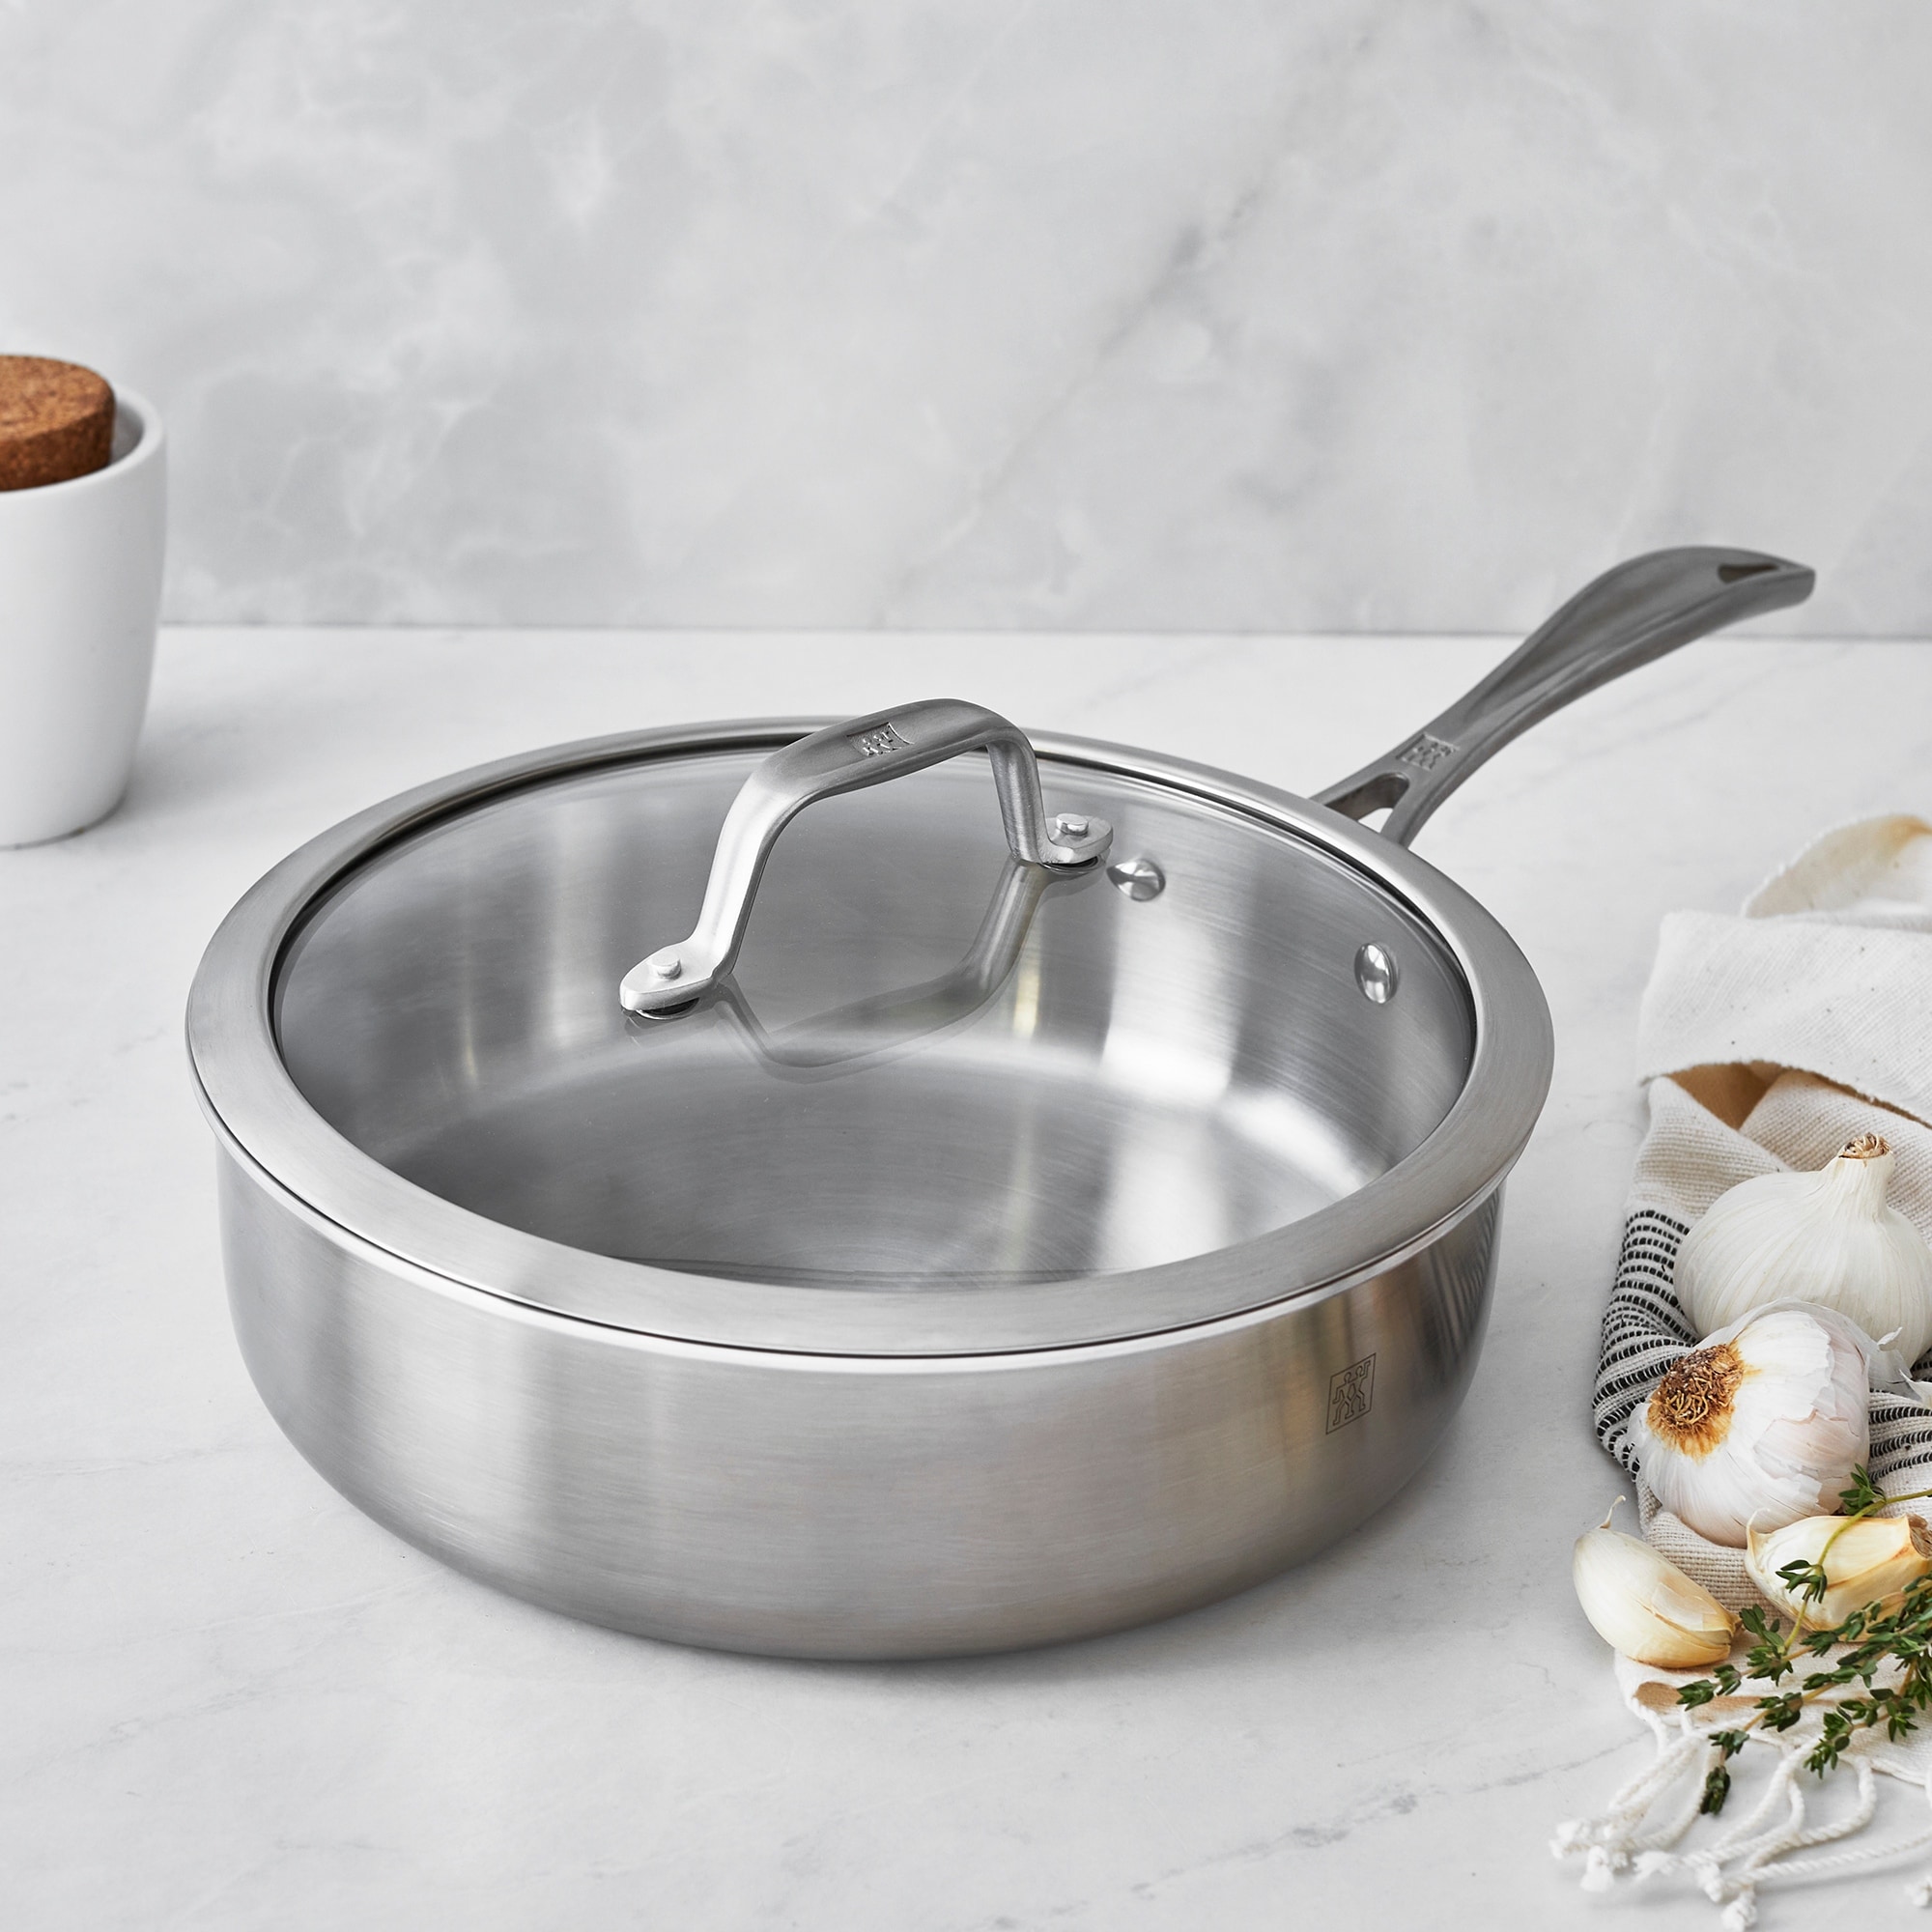 https://ak1.ostkcdn.com/images/products/is/images/direct/51f828a5da6c98d8dda50e9bab2f6a4c8ce9ed06/ZWILLING-Spirit-3-ply-Stainless-Steel-Saute-Pan.jpg